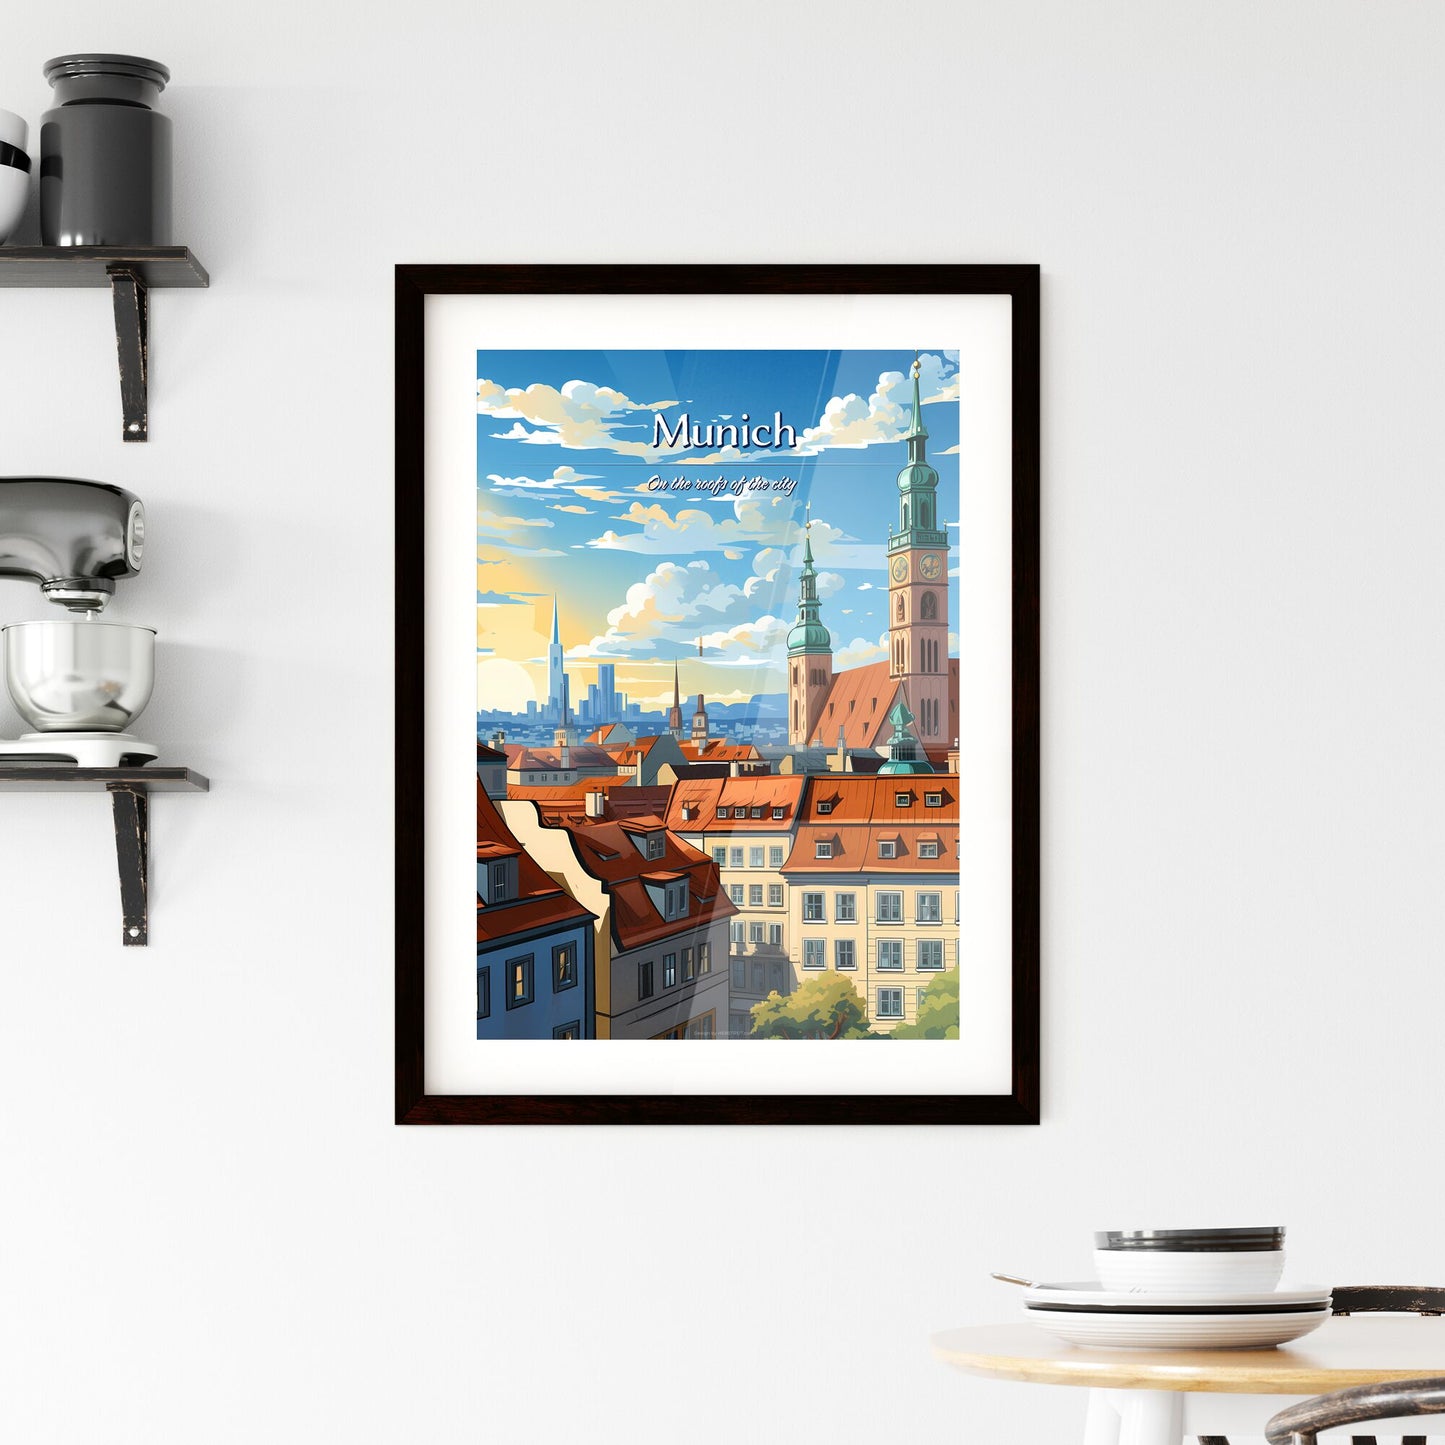 On the roofs of Munich - Art print of a city with a clock tower Default Title